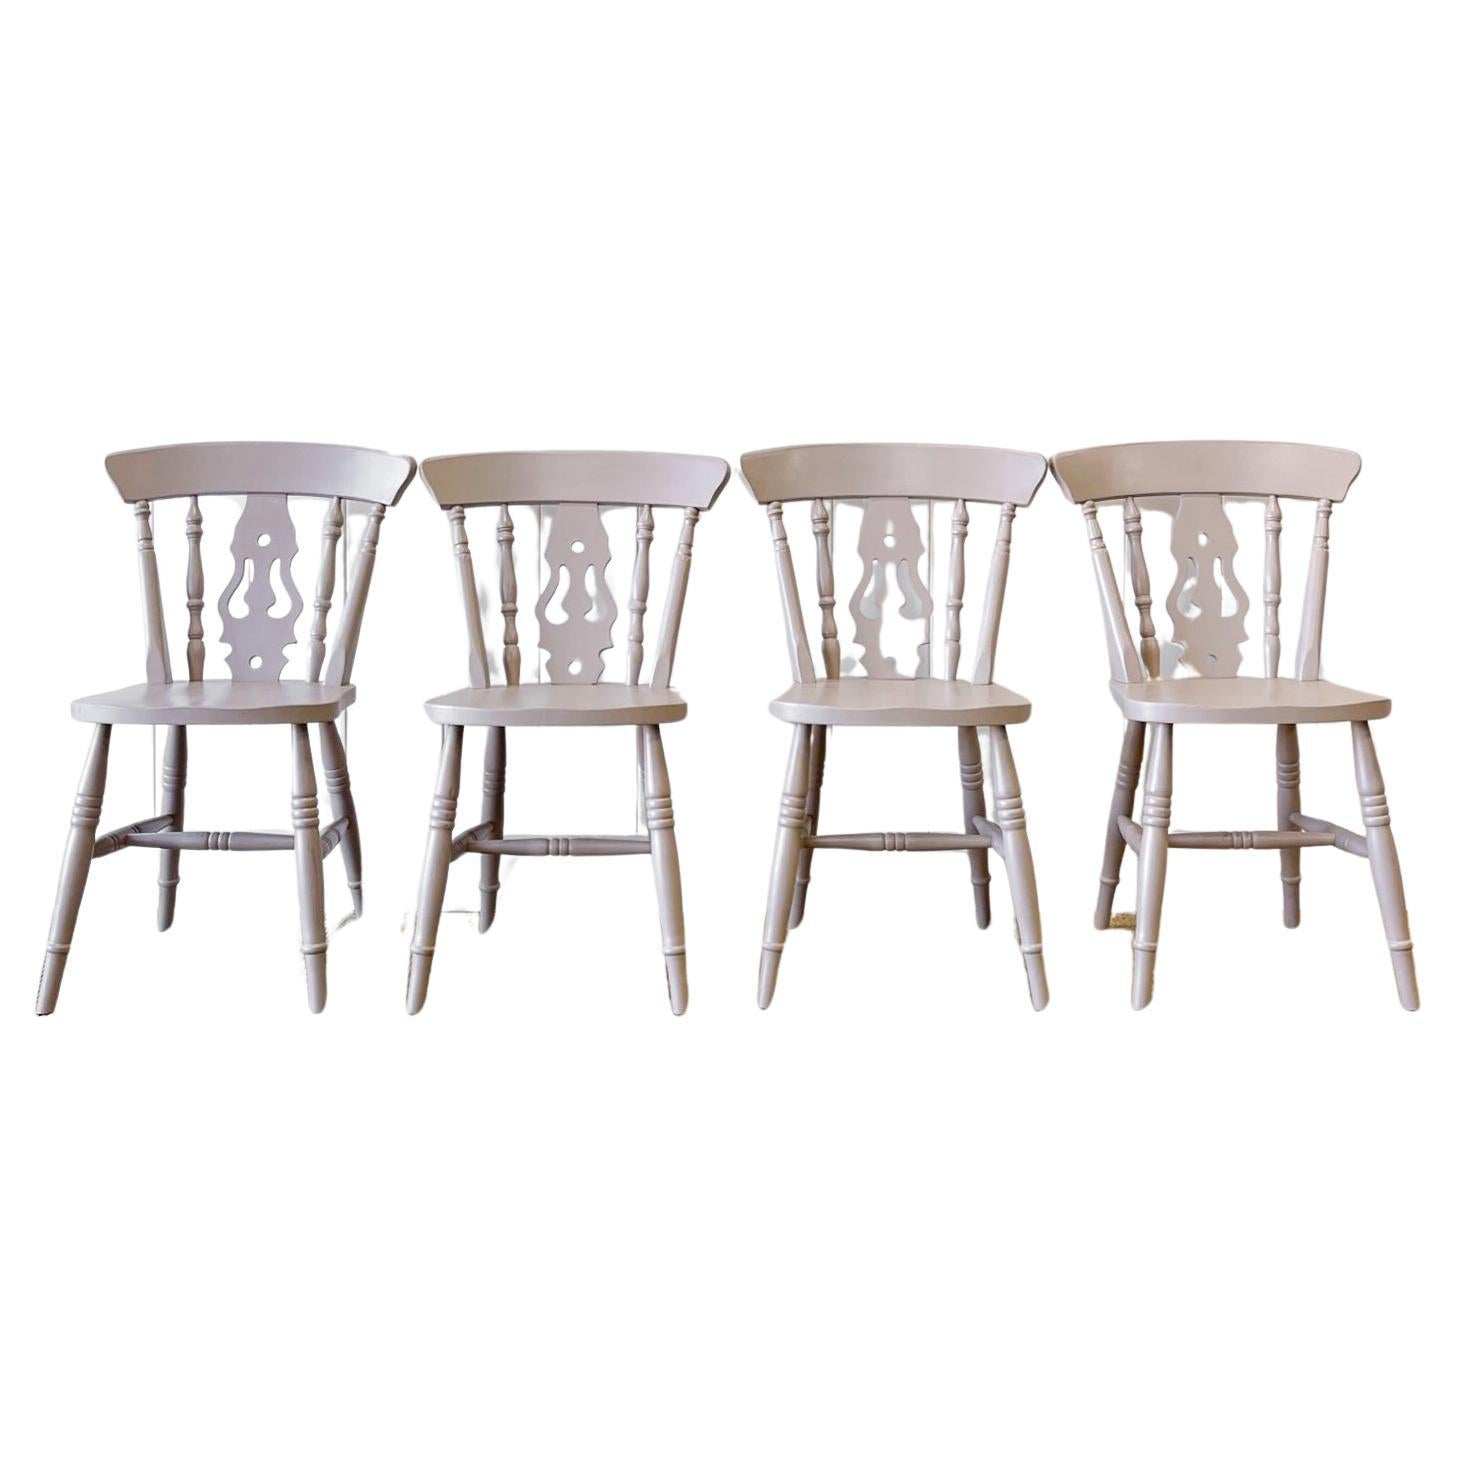 A Vintage Set of 4 Taupe Farmhouse Fiddleback Chairs